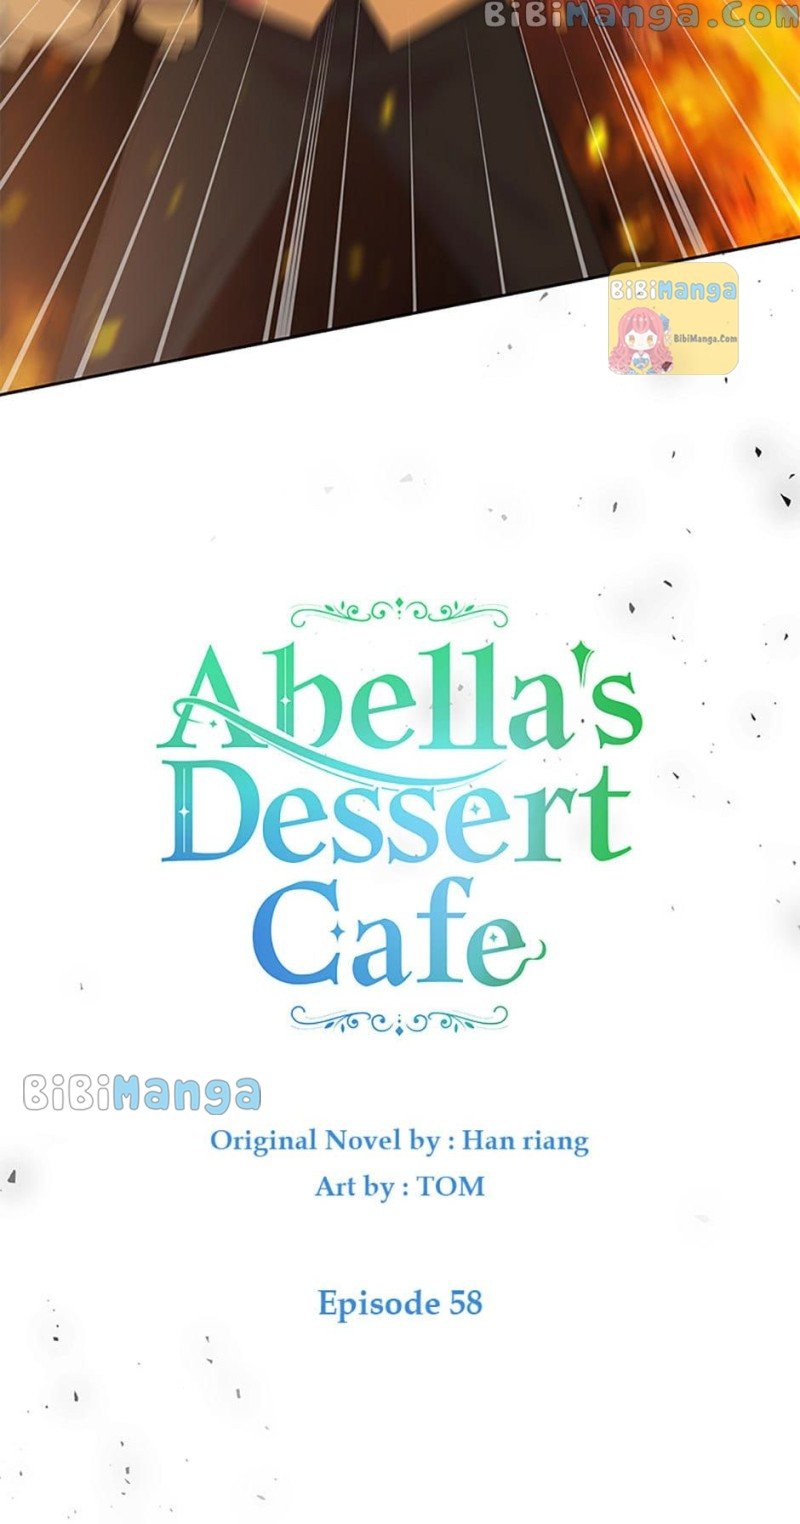 She came back and opened a dessert shop chapter 58